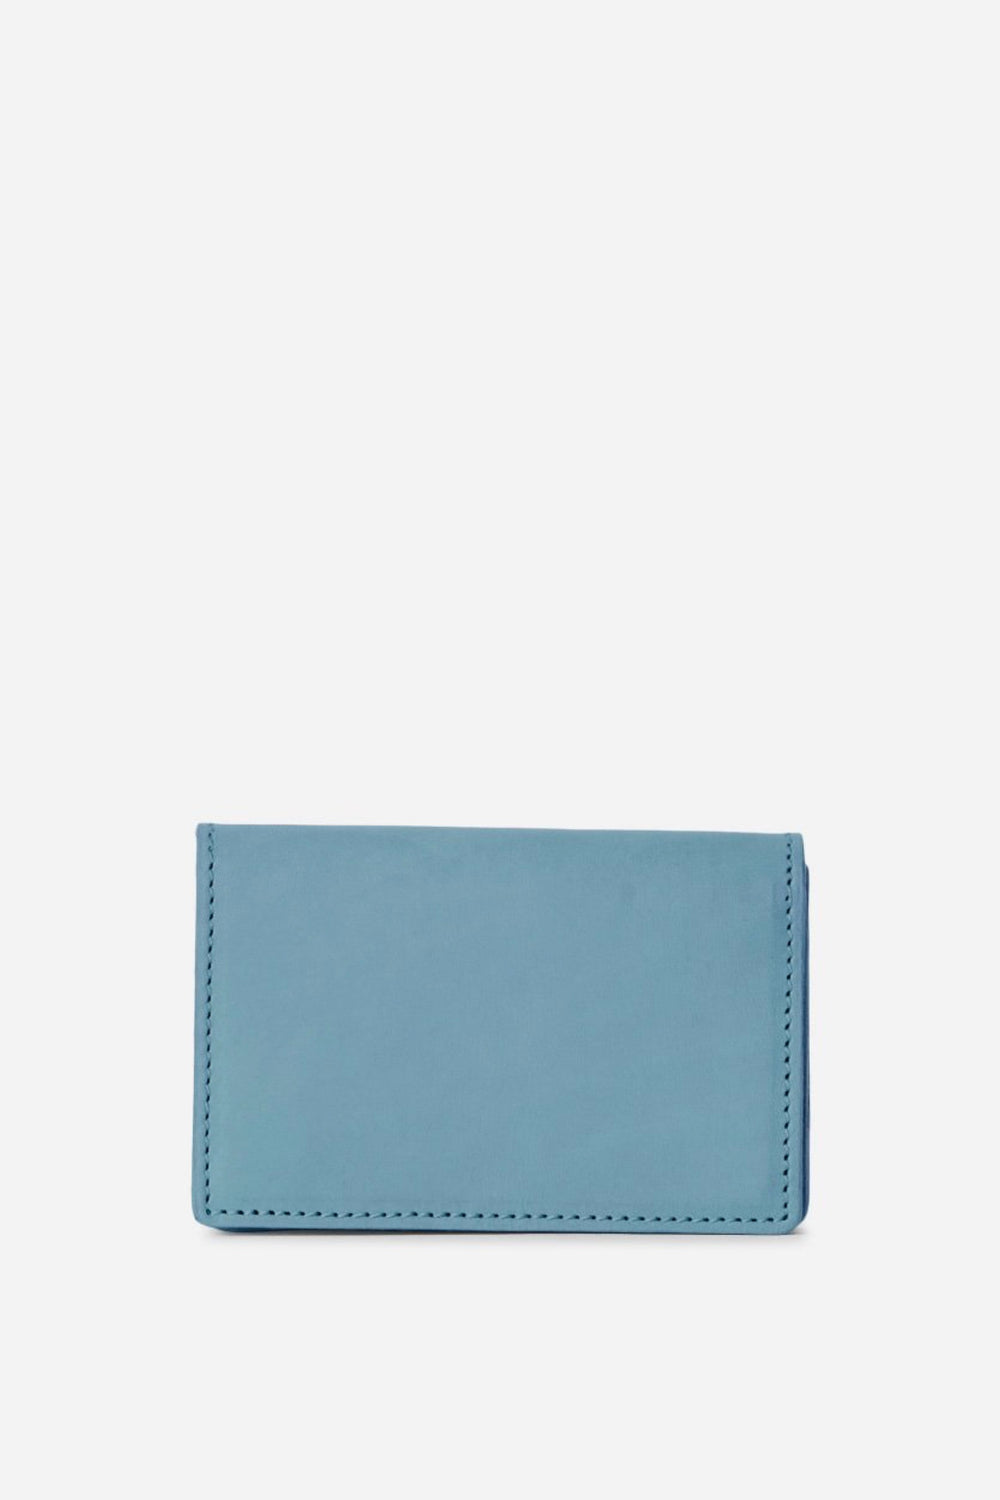 Pacific Oyster Wallet